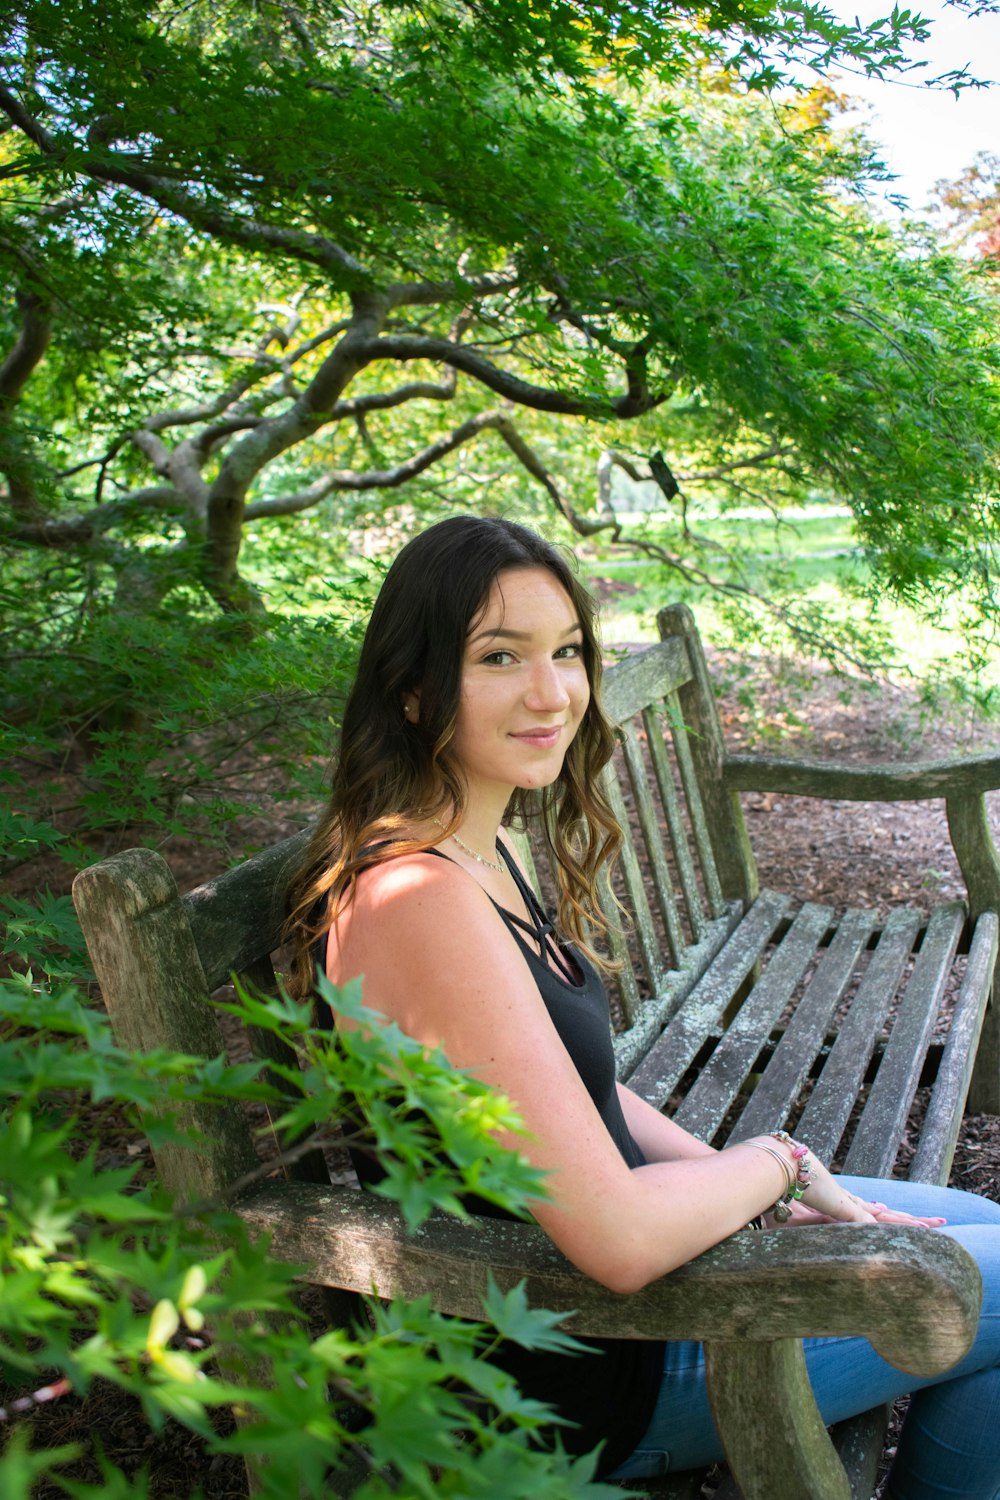 a woman sitting on a wooden bench in a park